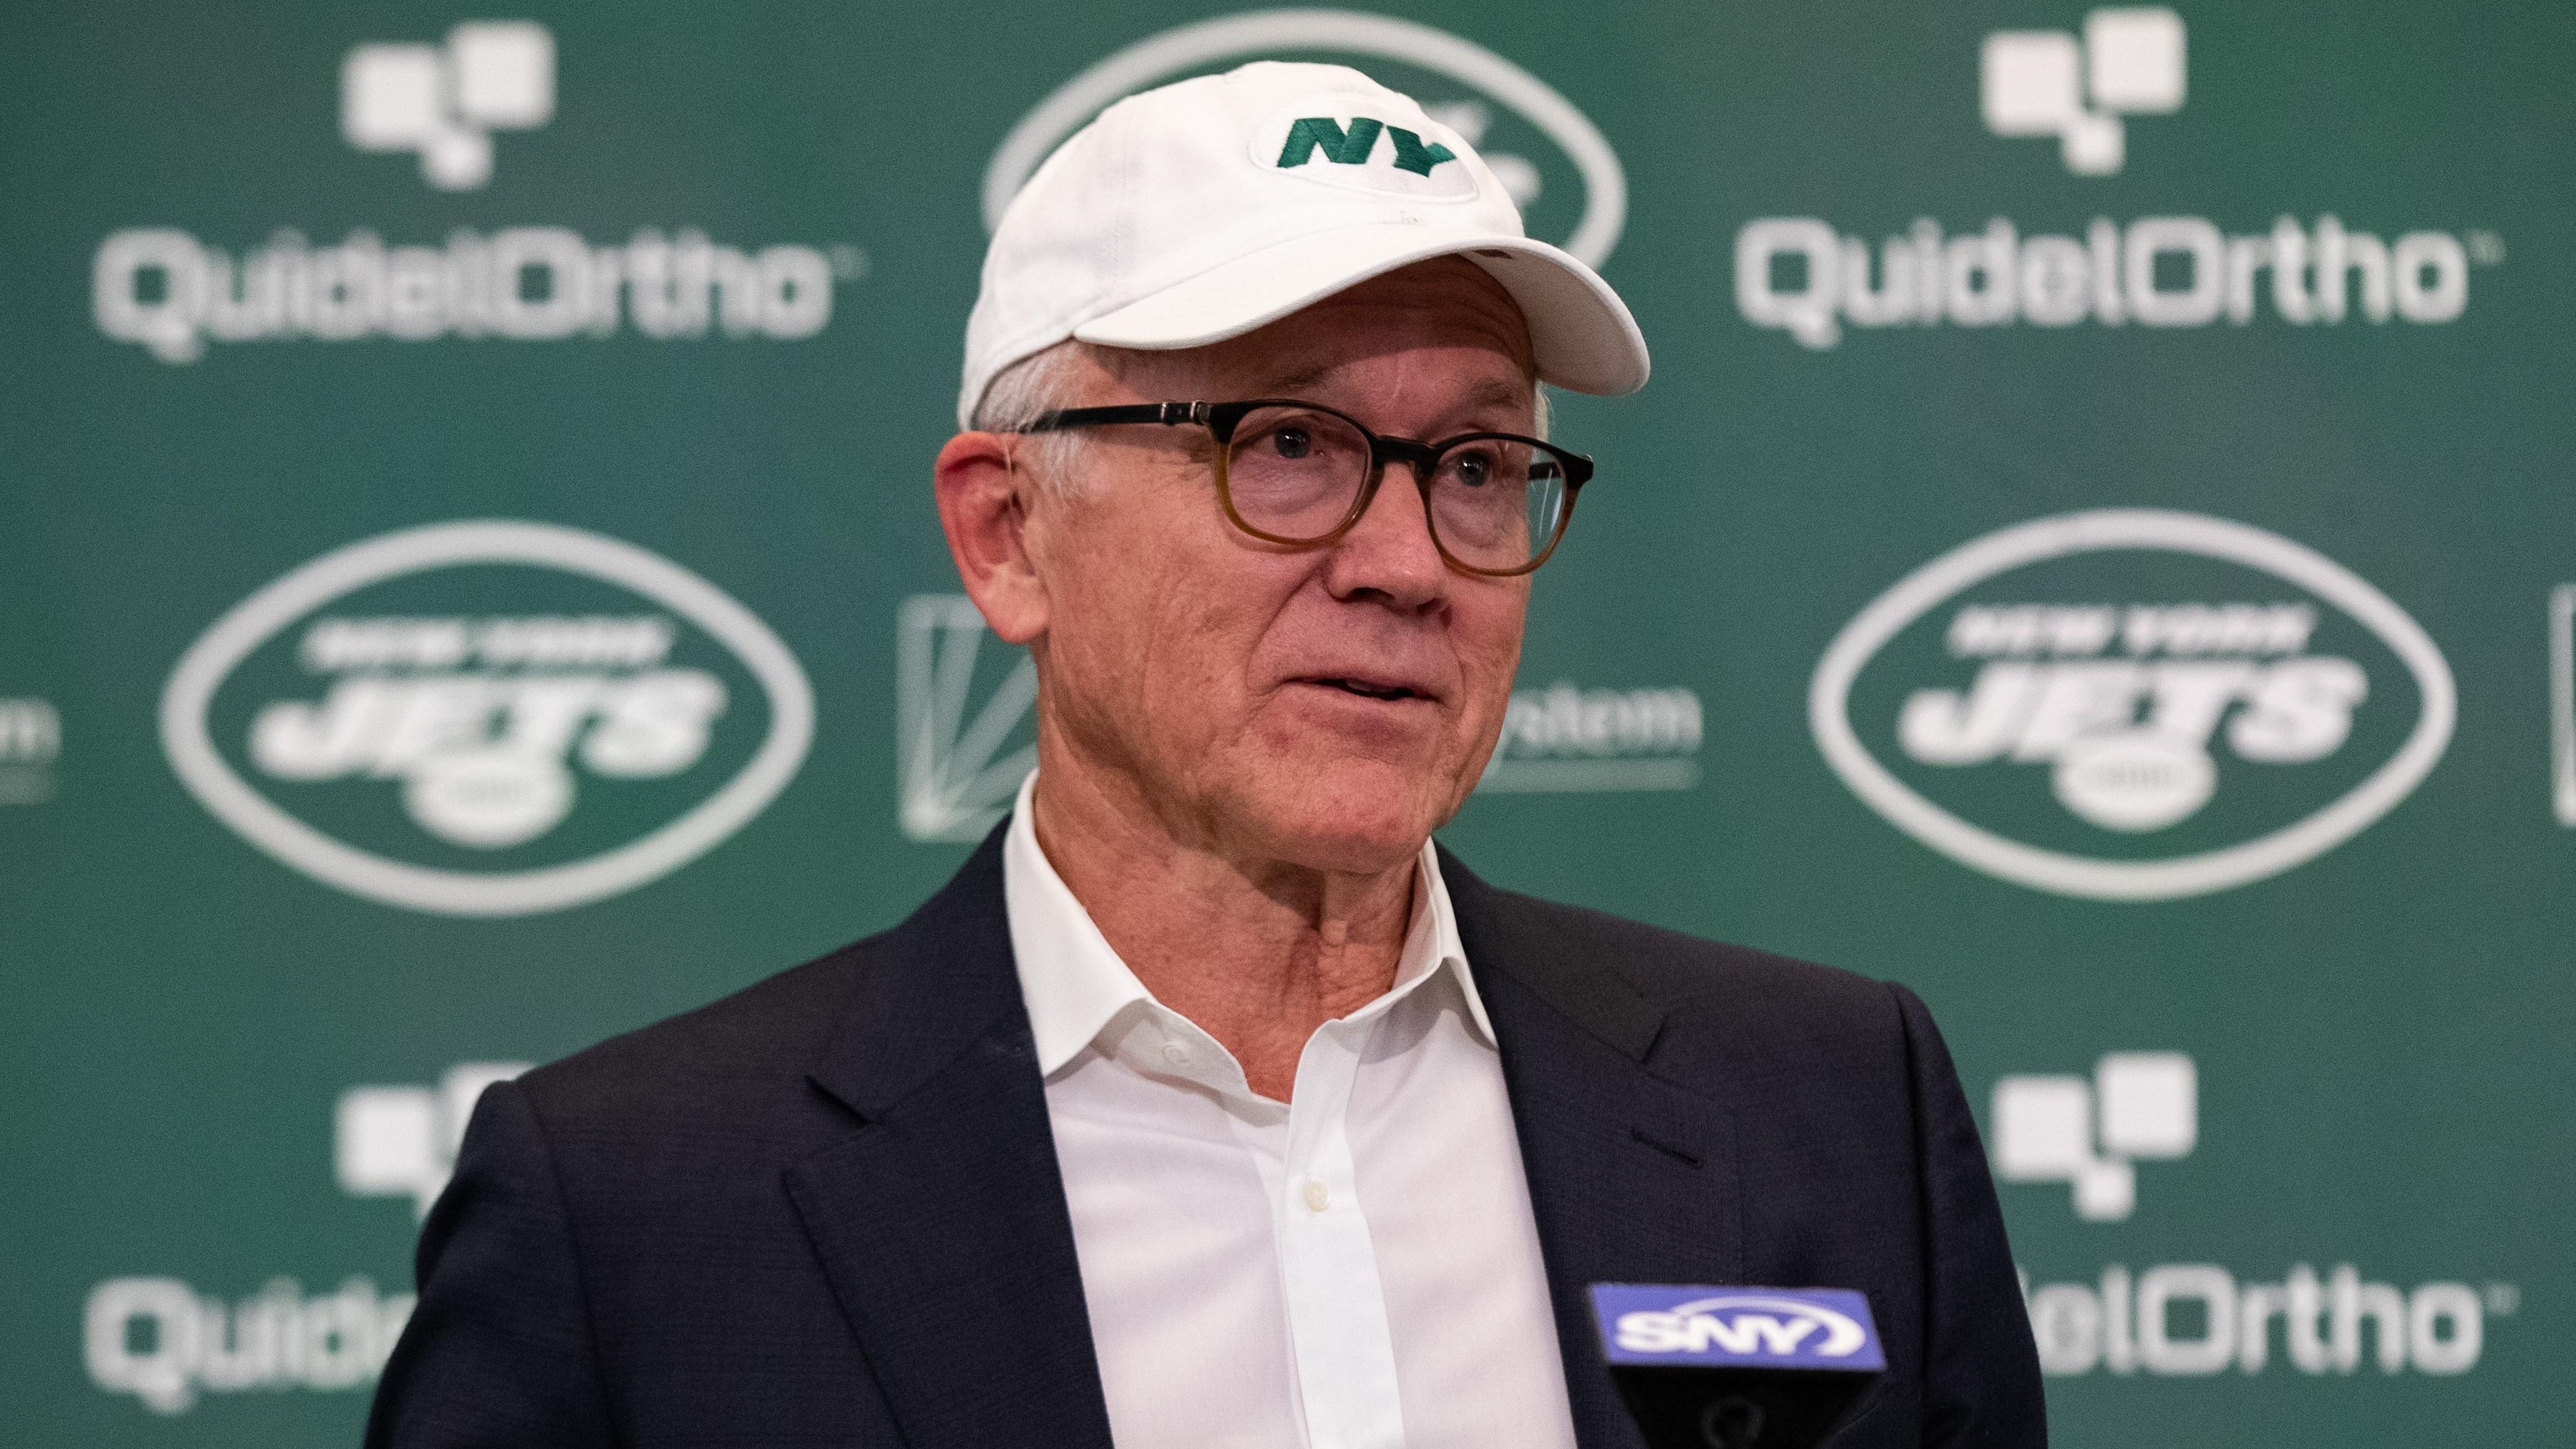 Jets owner Woody Johnson sits at the podium during the Aaron Rodgers introductory news conference. / Tom Horak-USA TODAY Sports